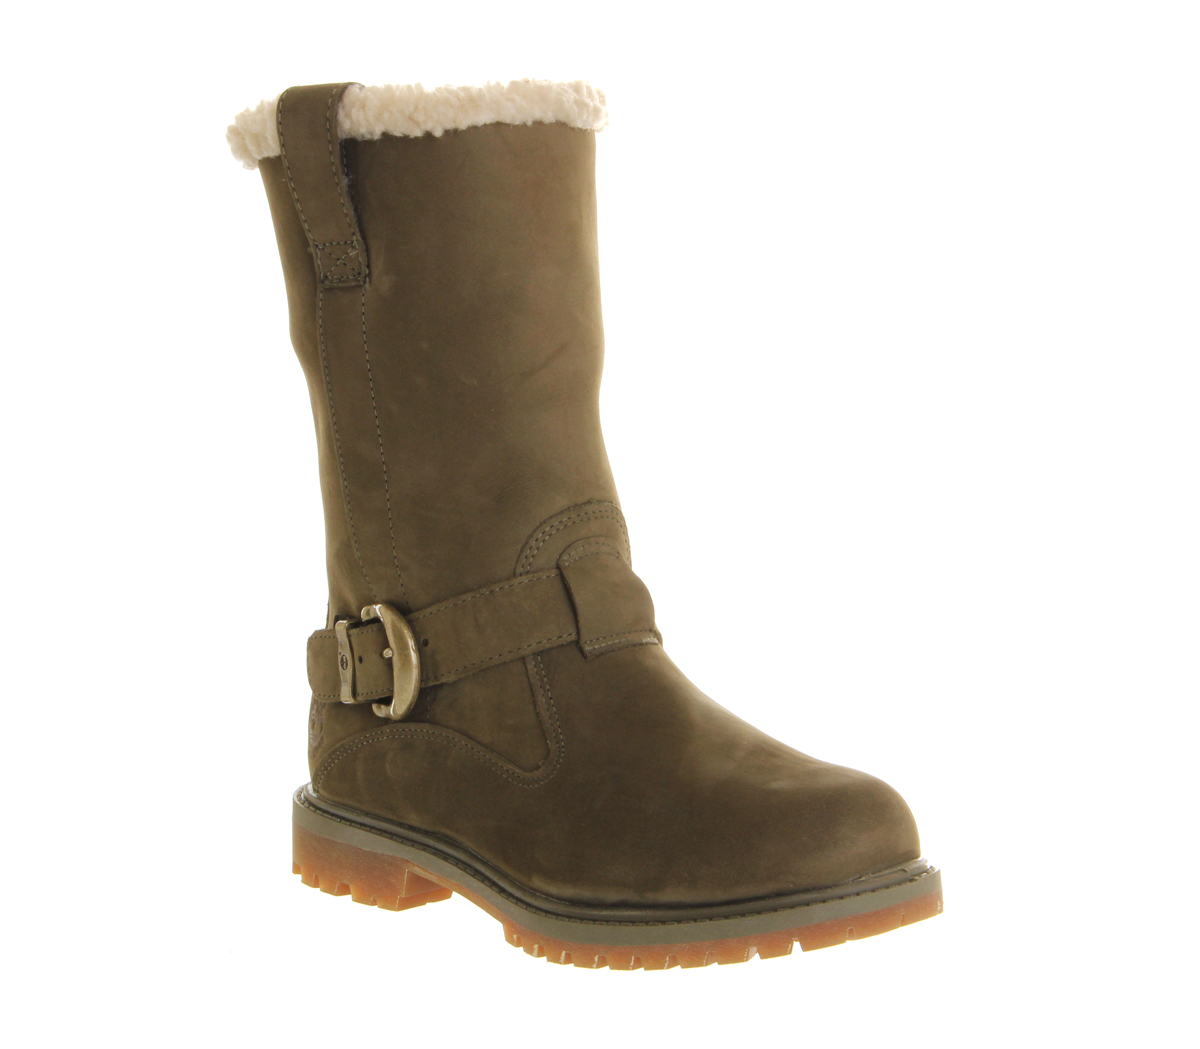 TimberlandNellie Pull On bootsOlive Nubuck